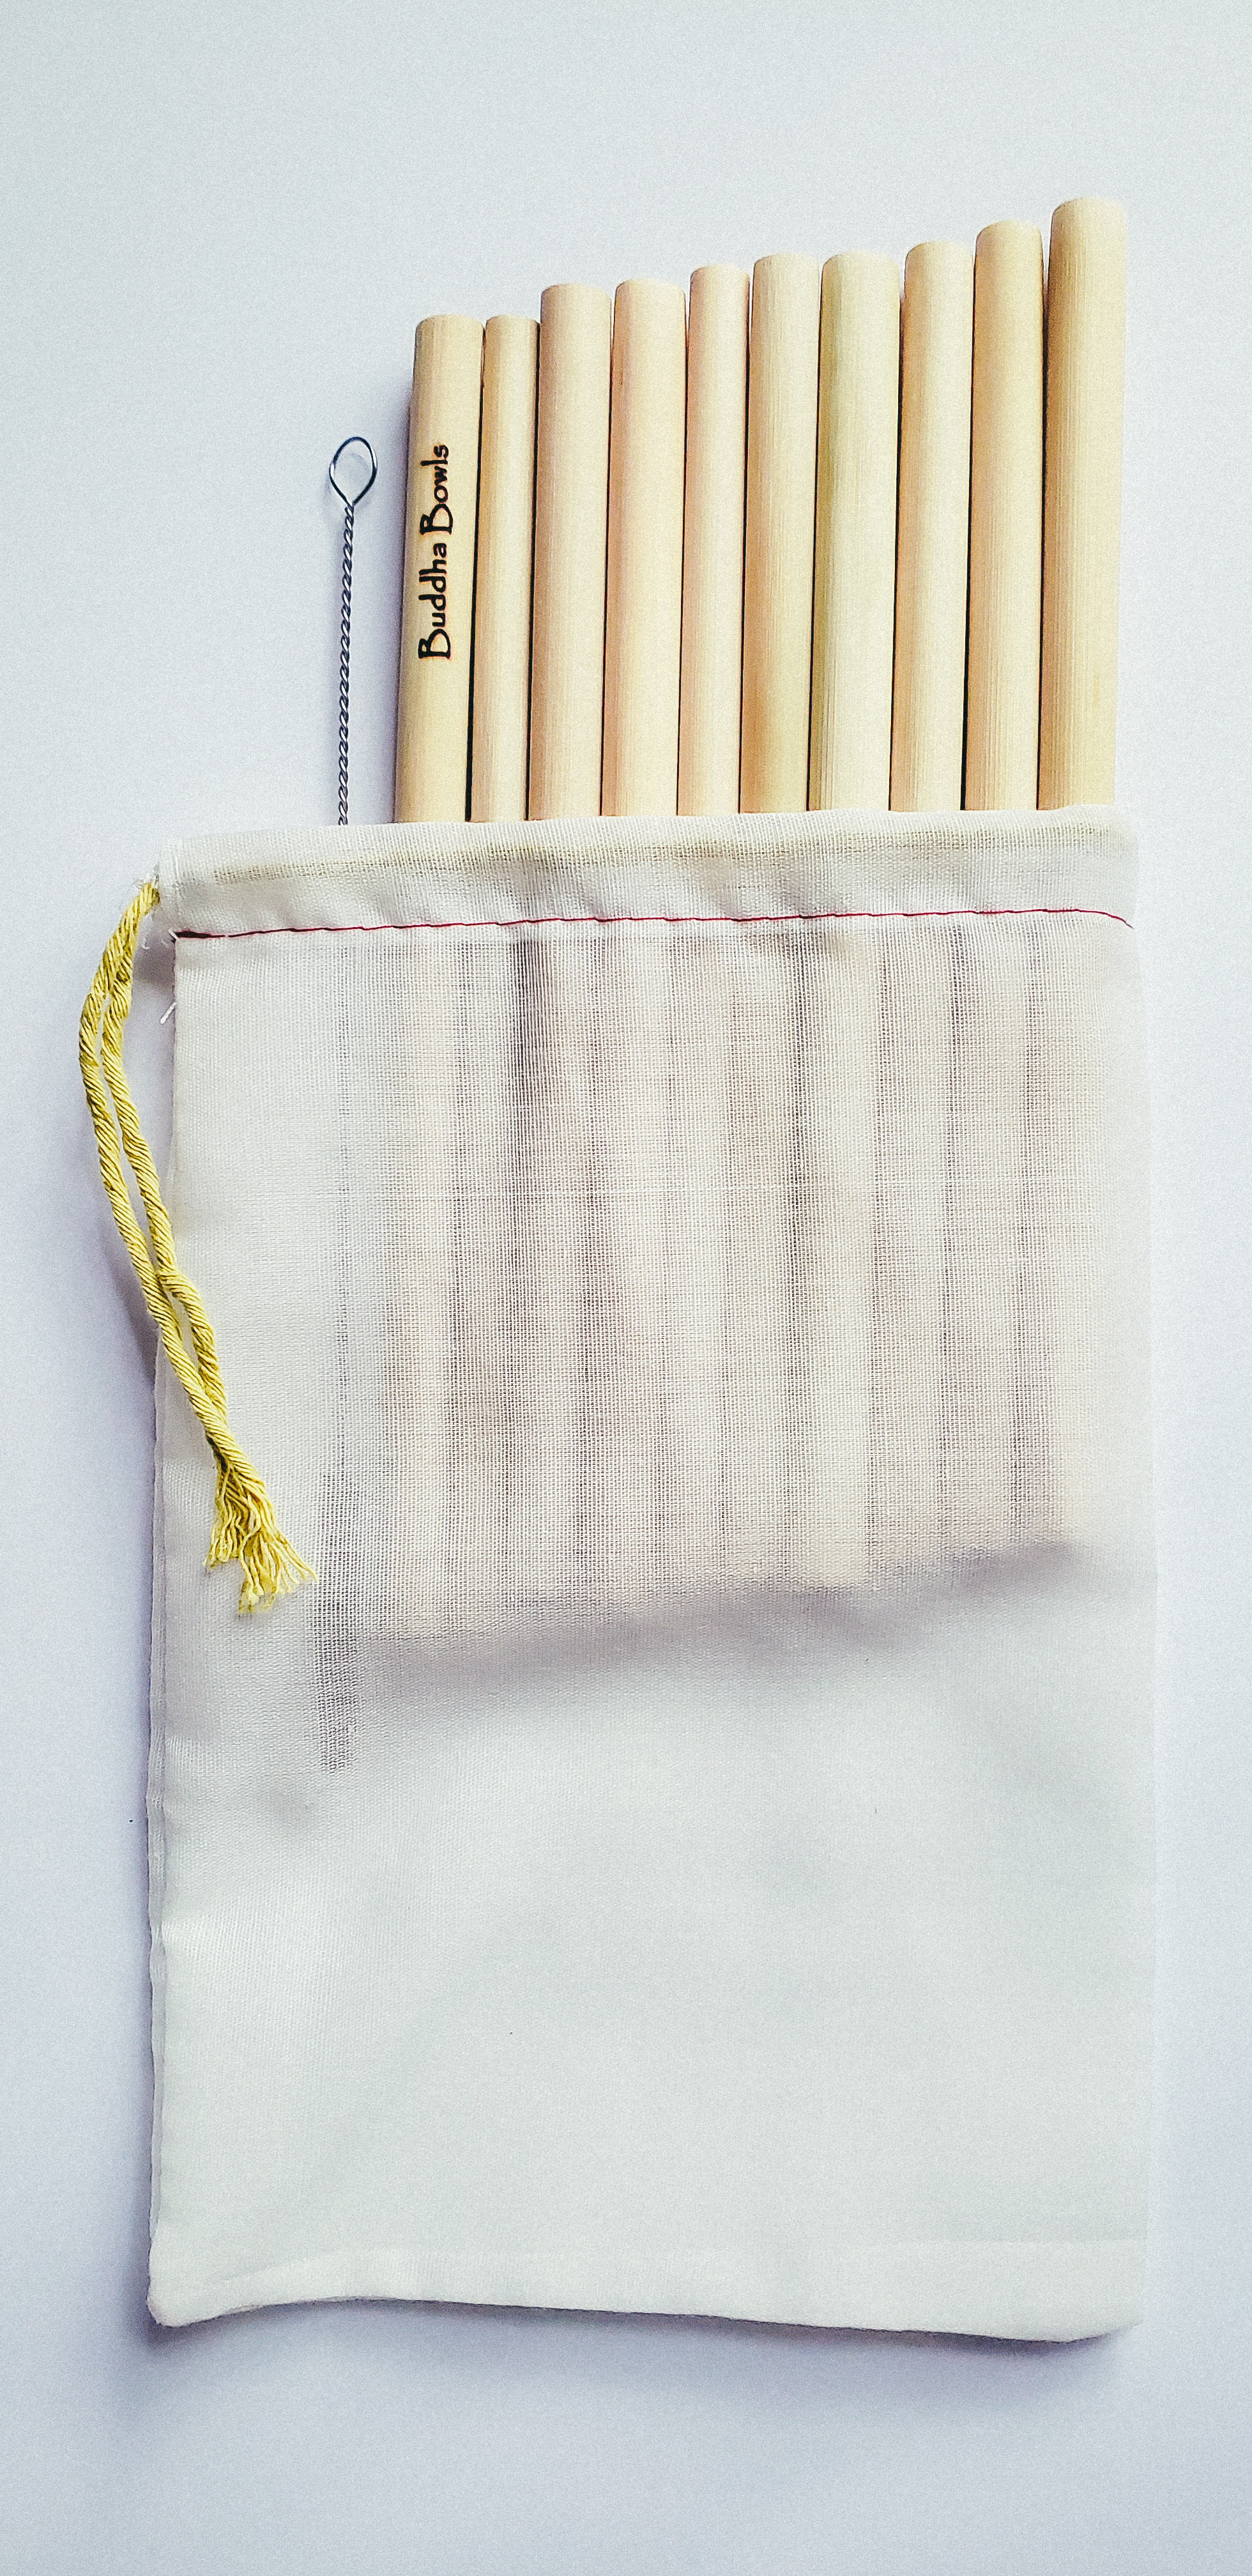 https://buddhabowls.org/wp-content/uploads/2019/05/10-pack-bamboo-straws-with-pouch-and-brush-cleaner.jpeg